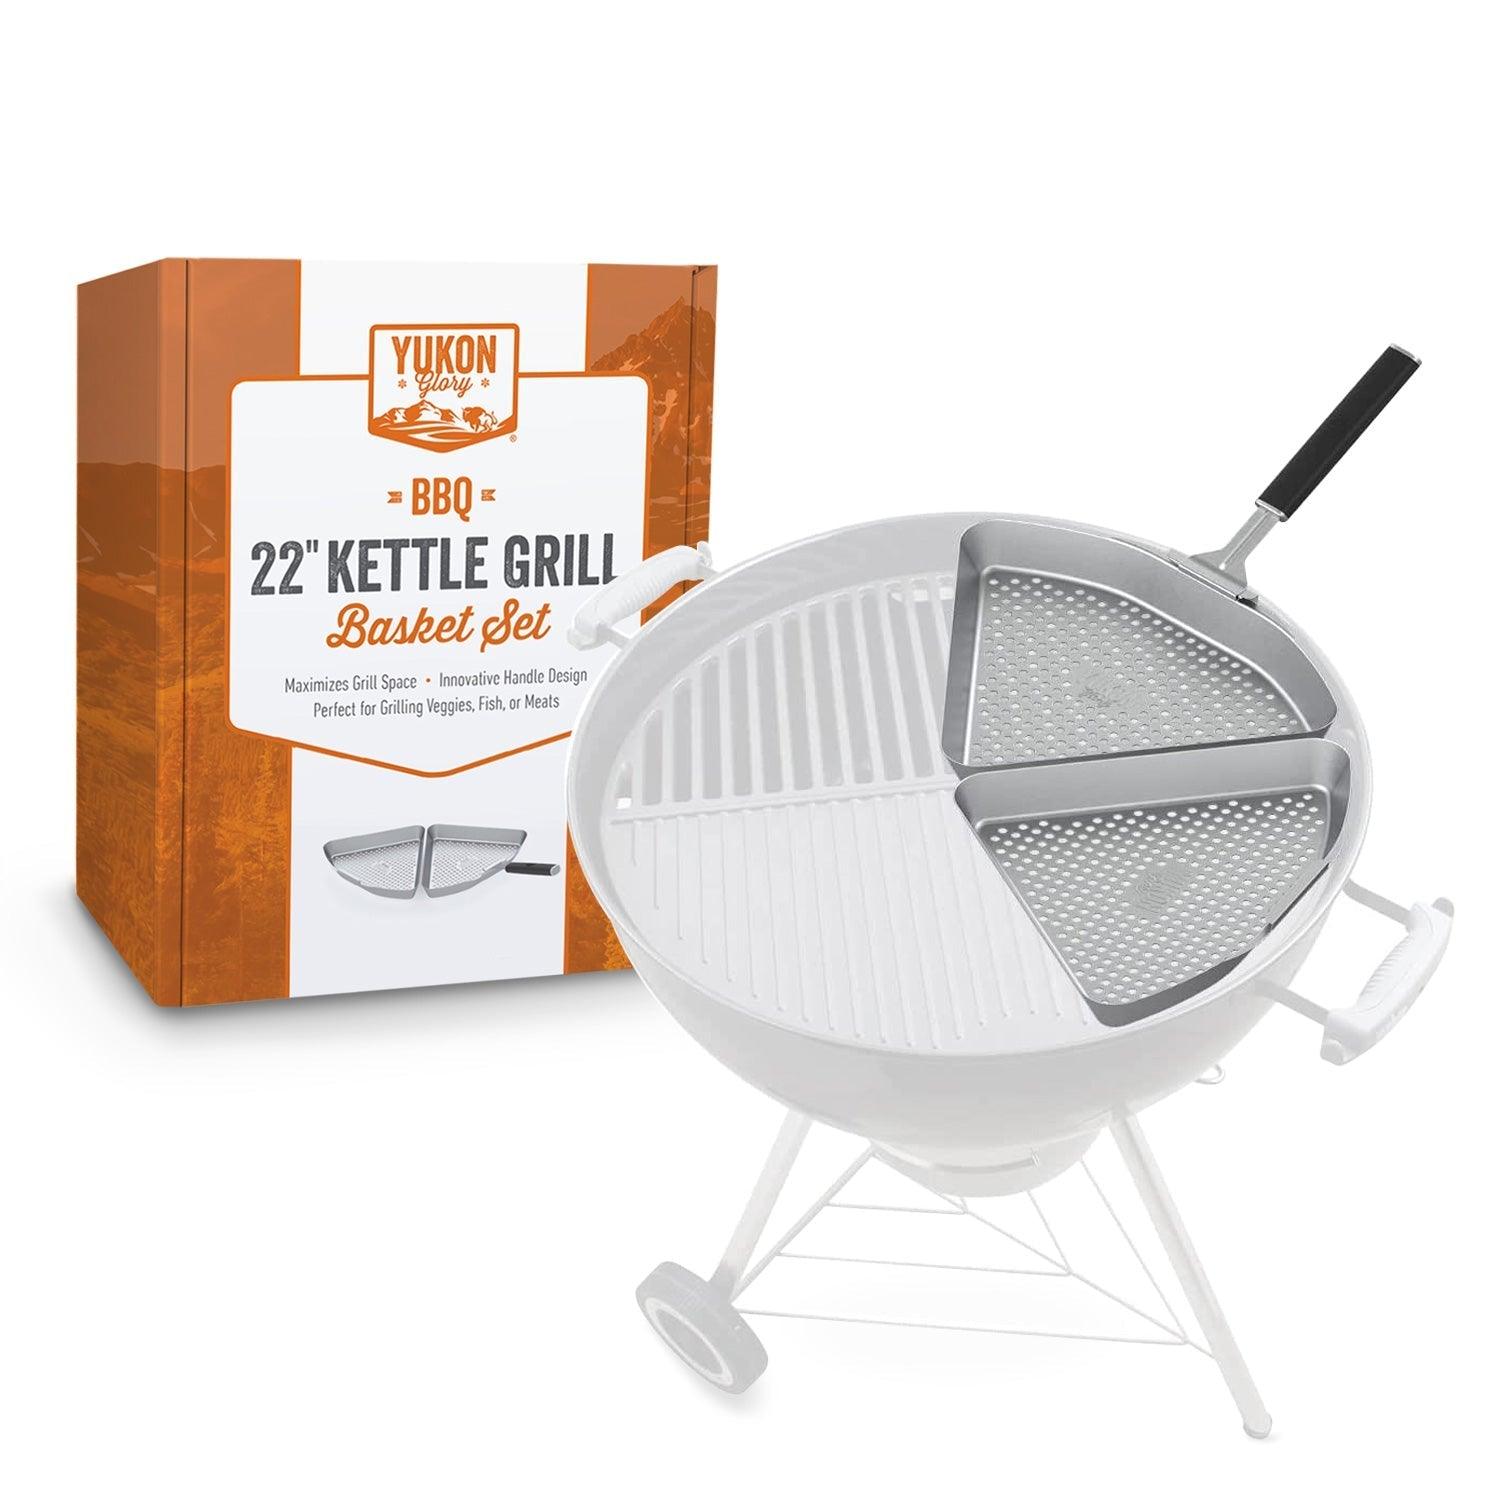 22 Kettle Grill Basket Set - Grill Accessories